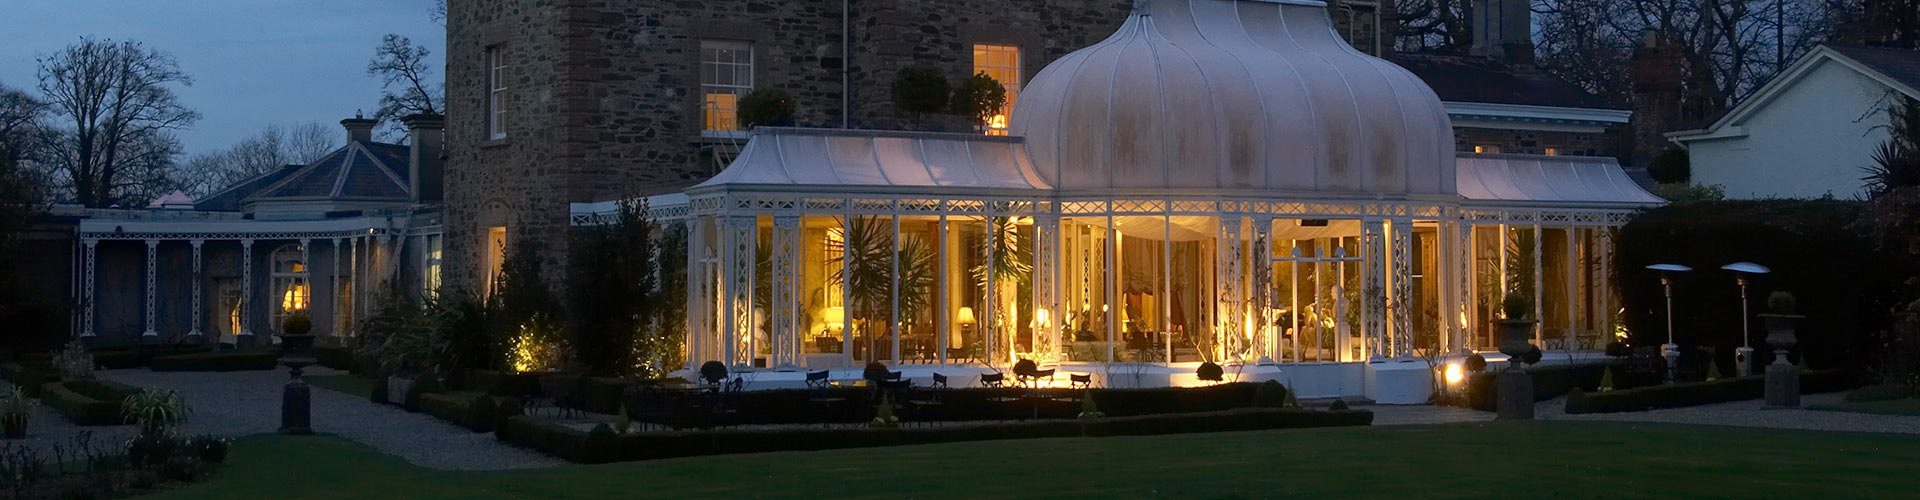 Country House Exclusive Private Wedding Venues Ireland